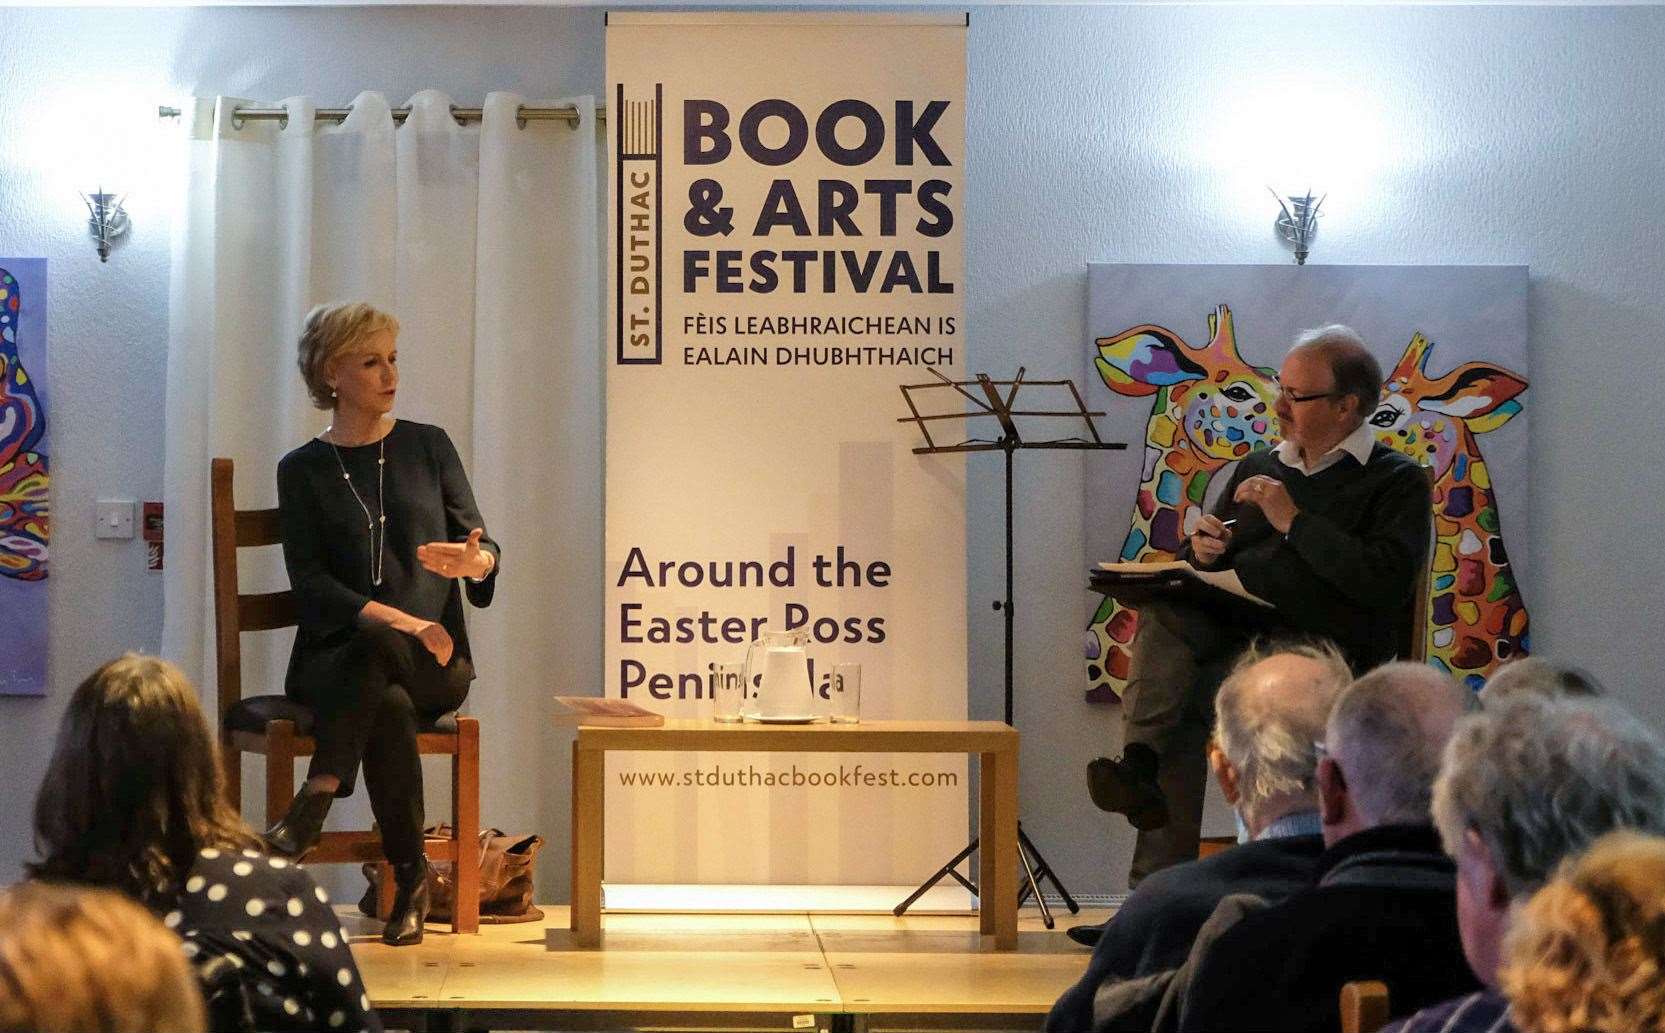 Sally Magnusson has appeared previously at the St Duthac Book and Arts Festival. Picture: Mark Janes